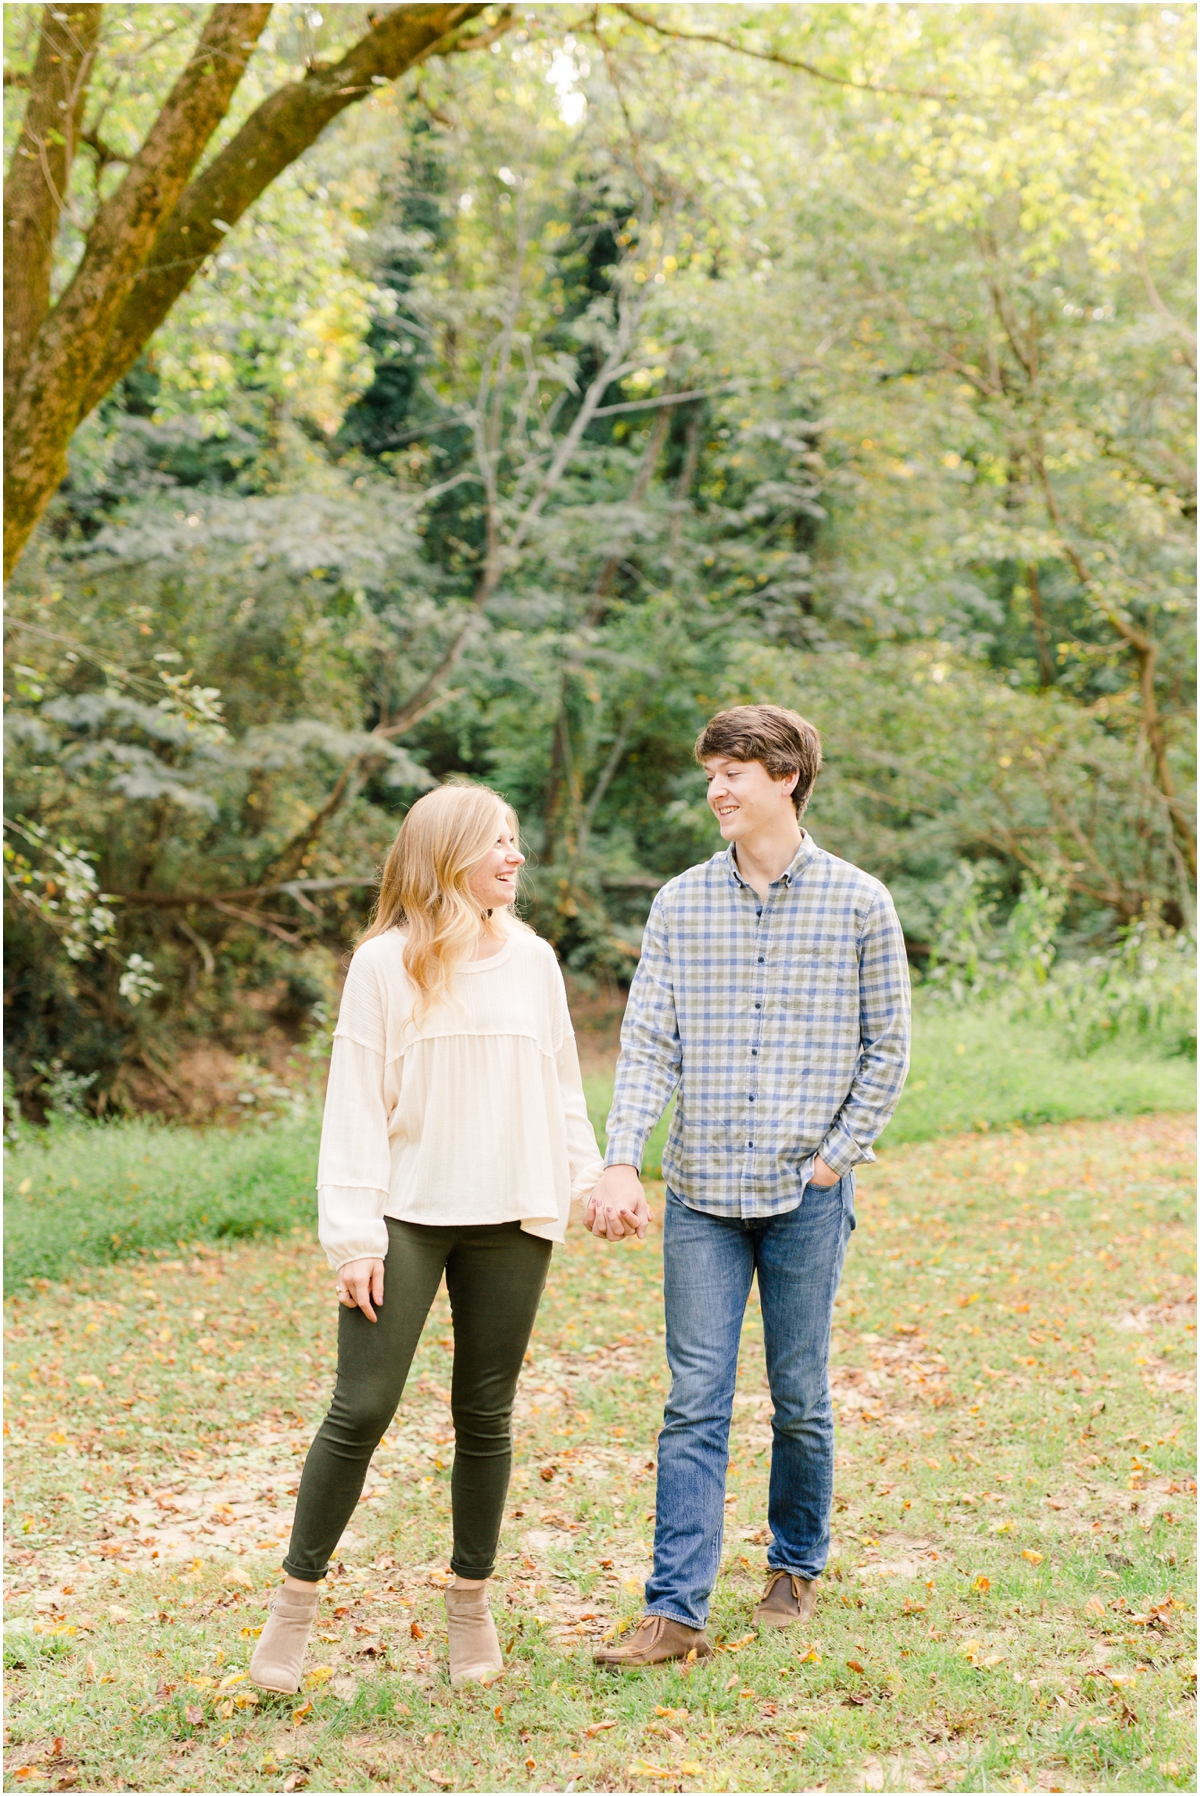 Cleveland Park engagement session in downtown greenville | greenville wedding photographer